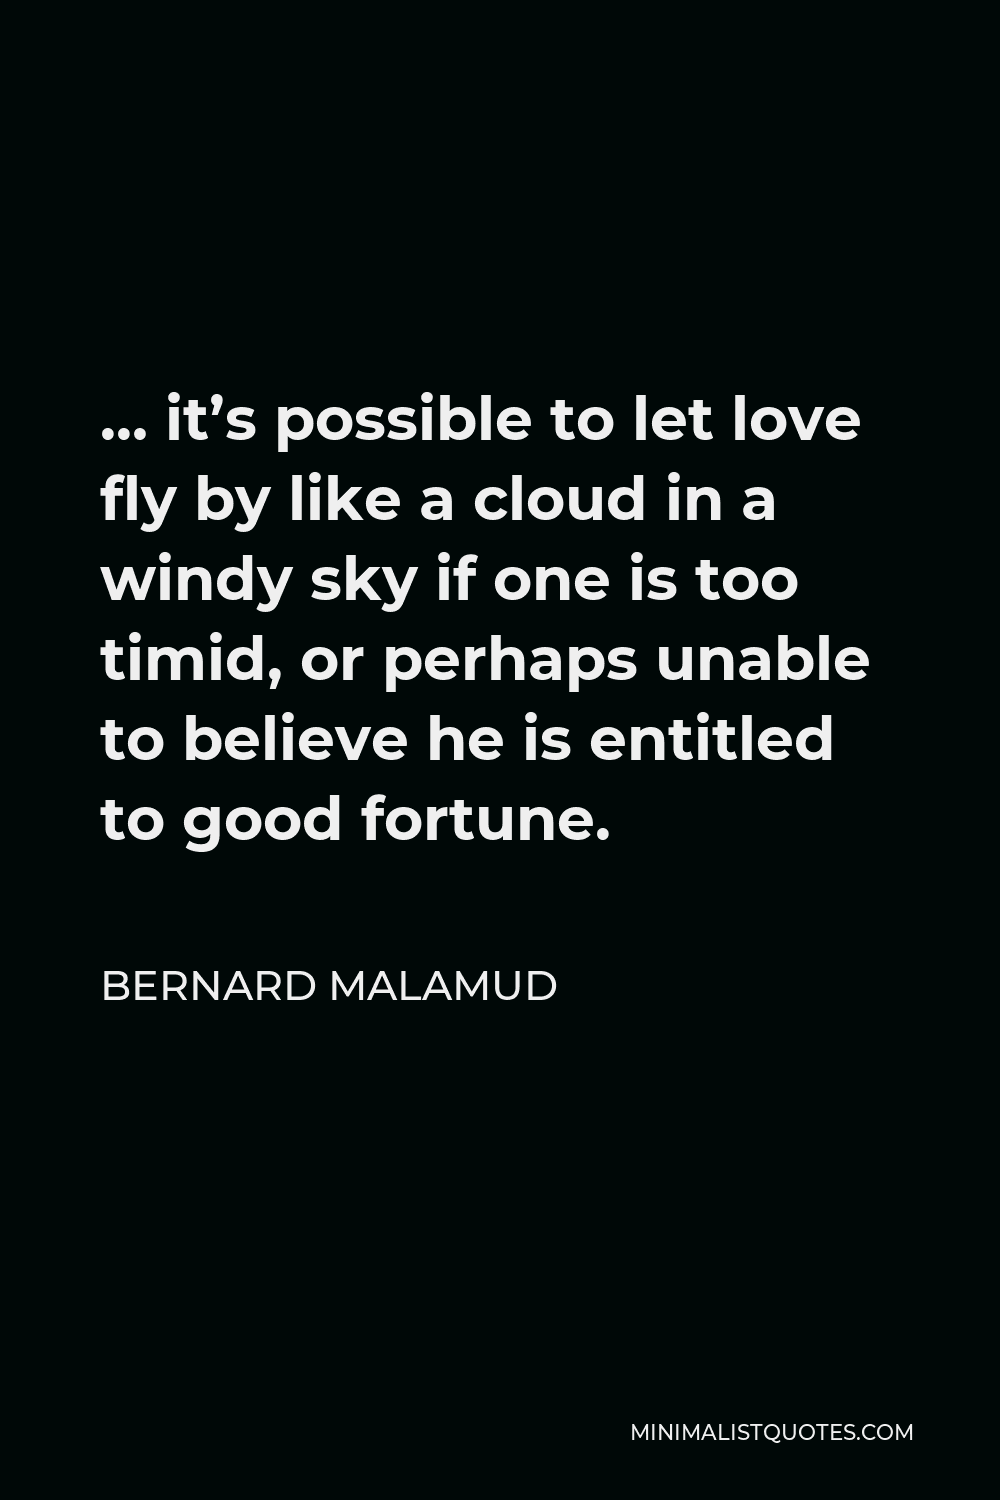 Bernard Malamud Quote - … it’s possible to let love fly by like a cloud in a windy sky if one is too timid, or perhaps unable to believe he is entitled to good fortune.